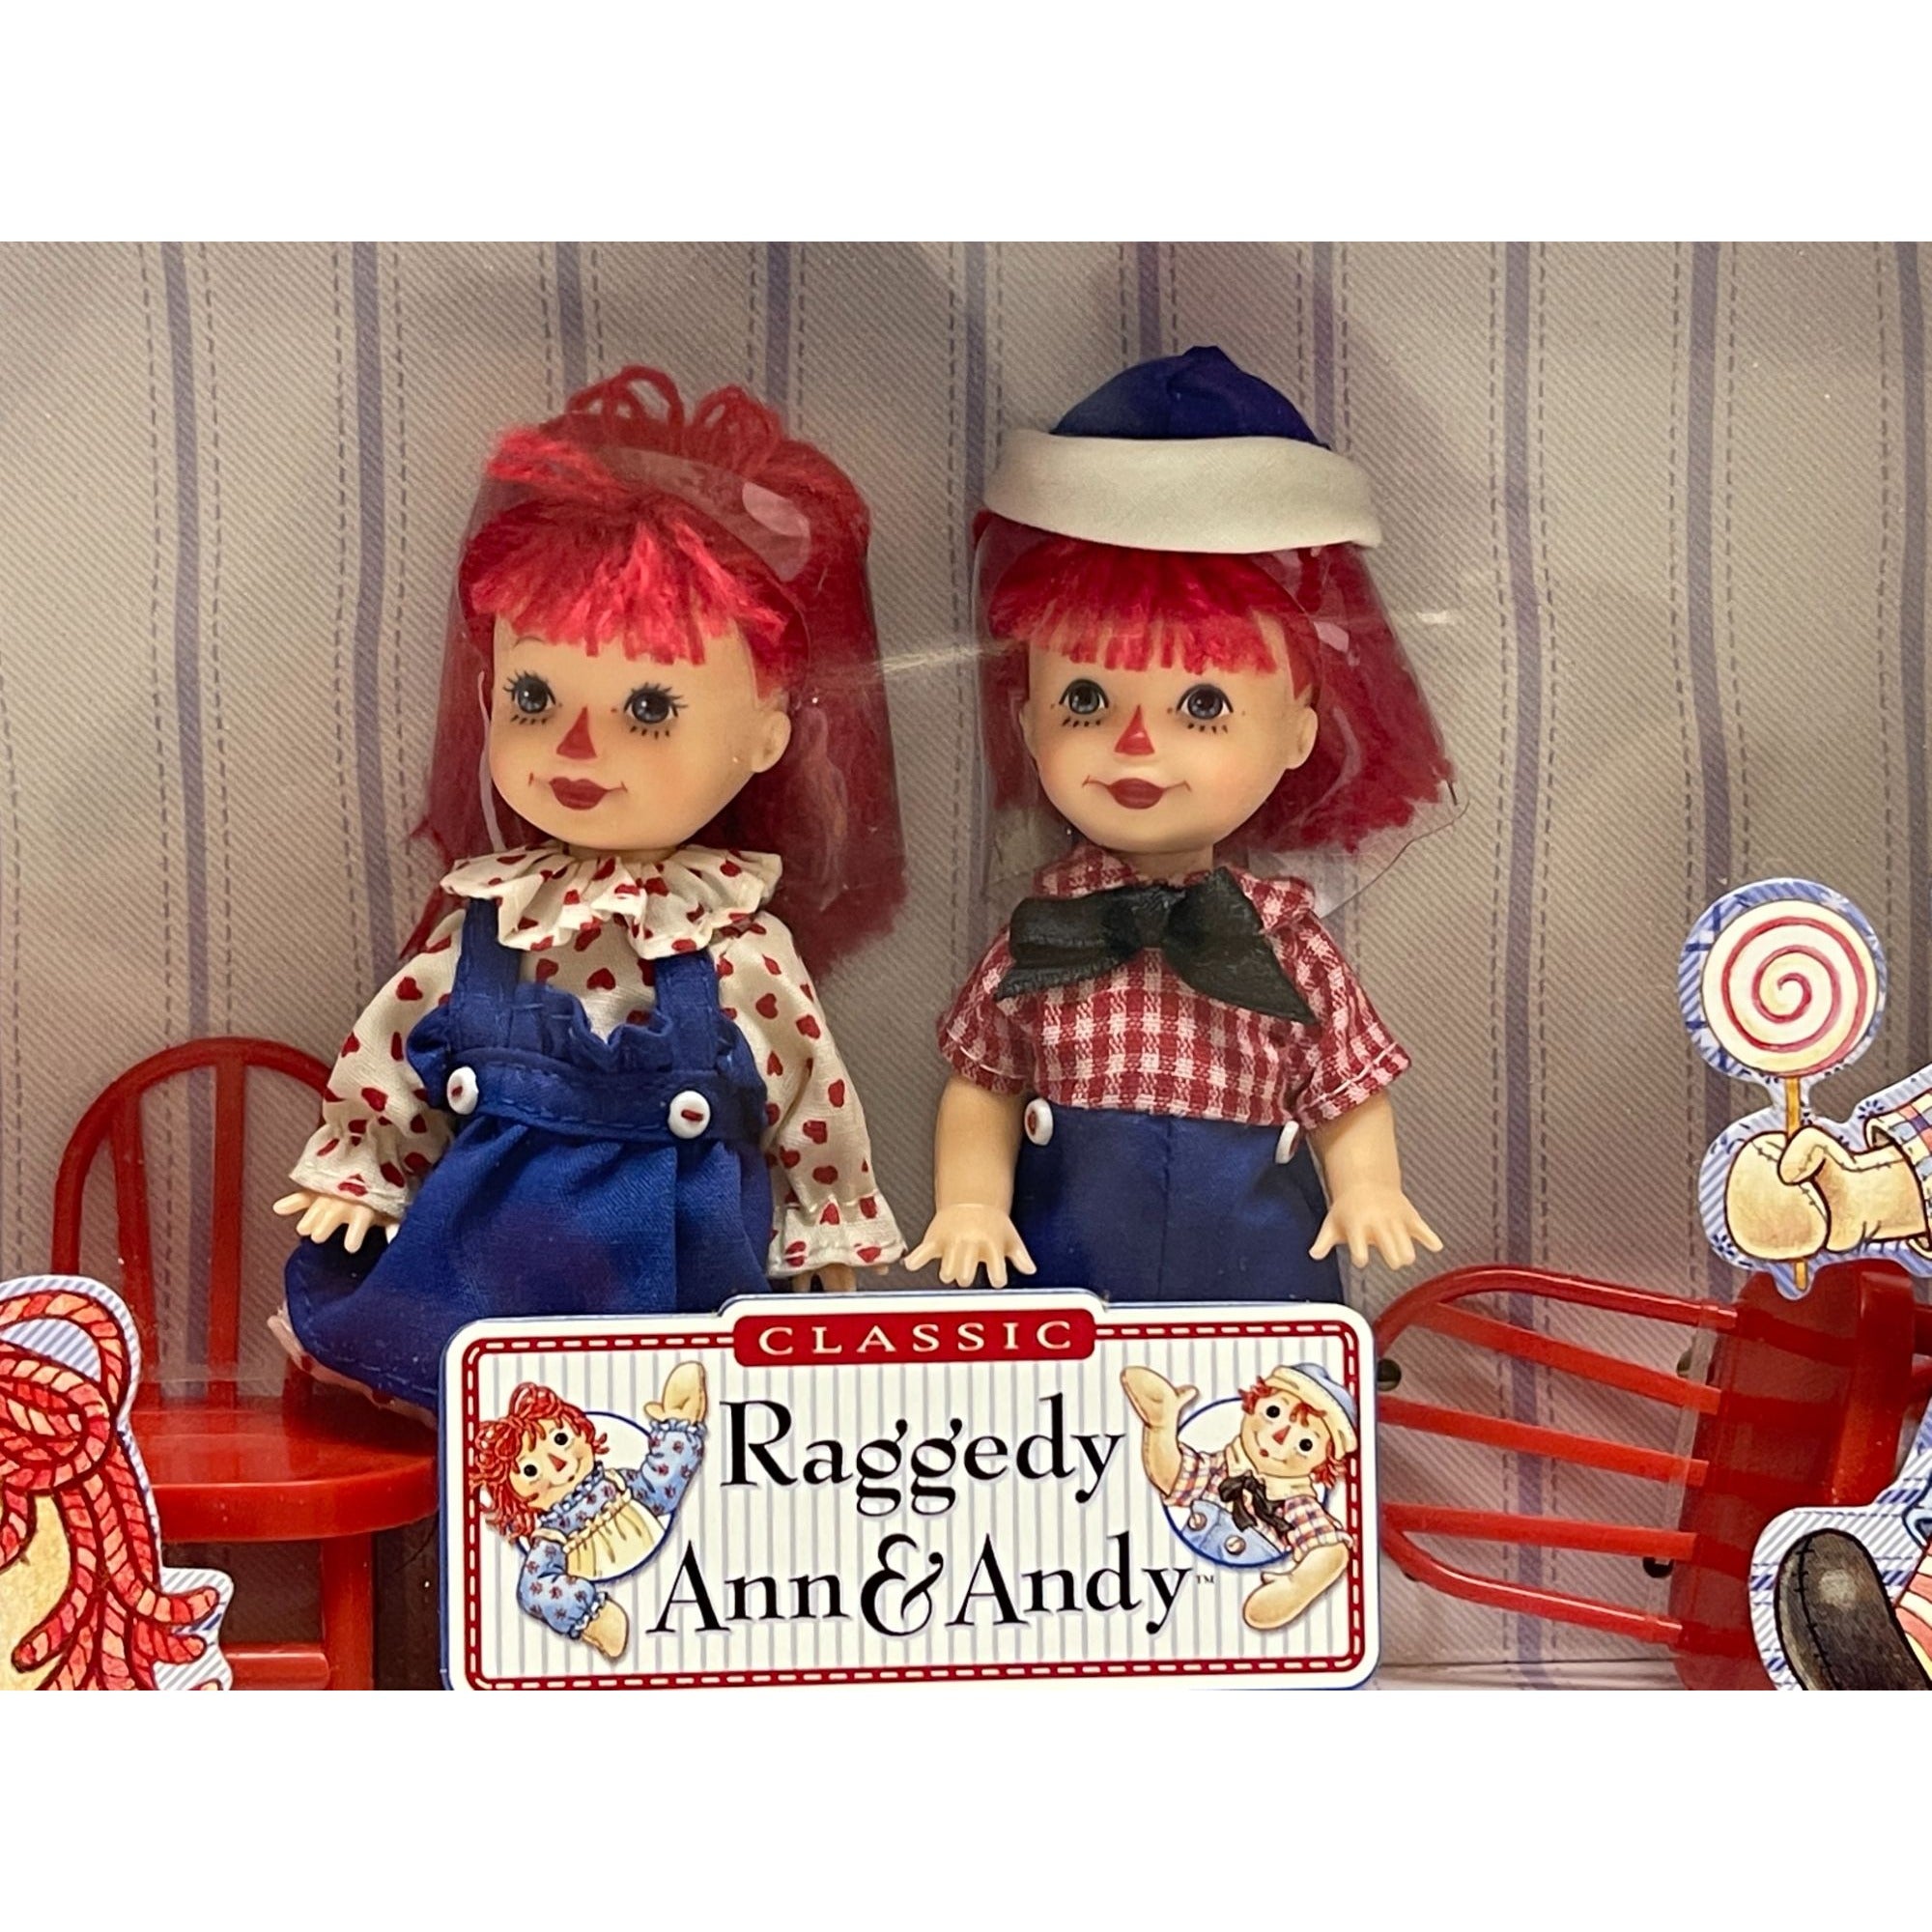 McDonald's Happy Meal Box with Raggedy Ann & Andy